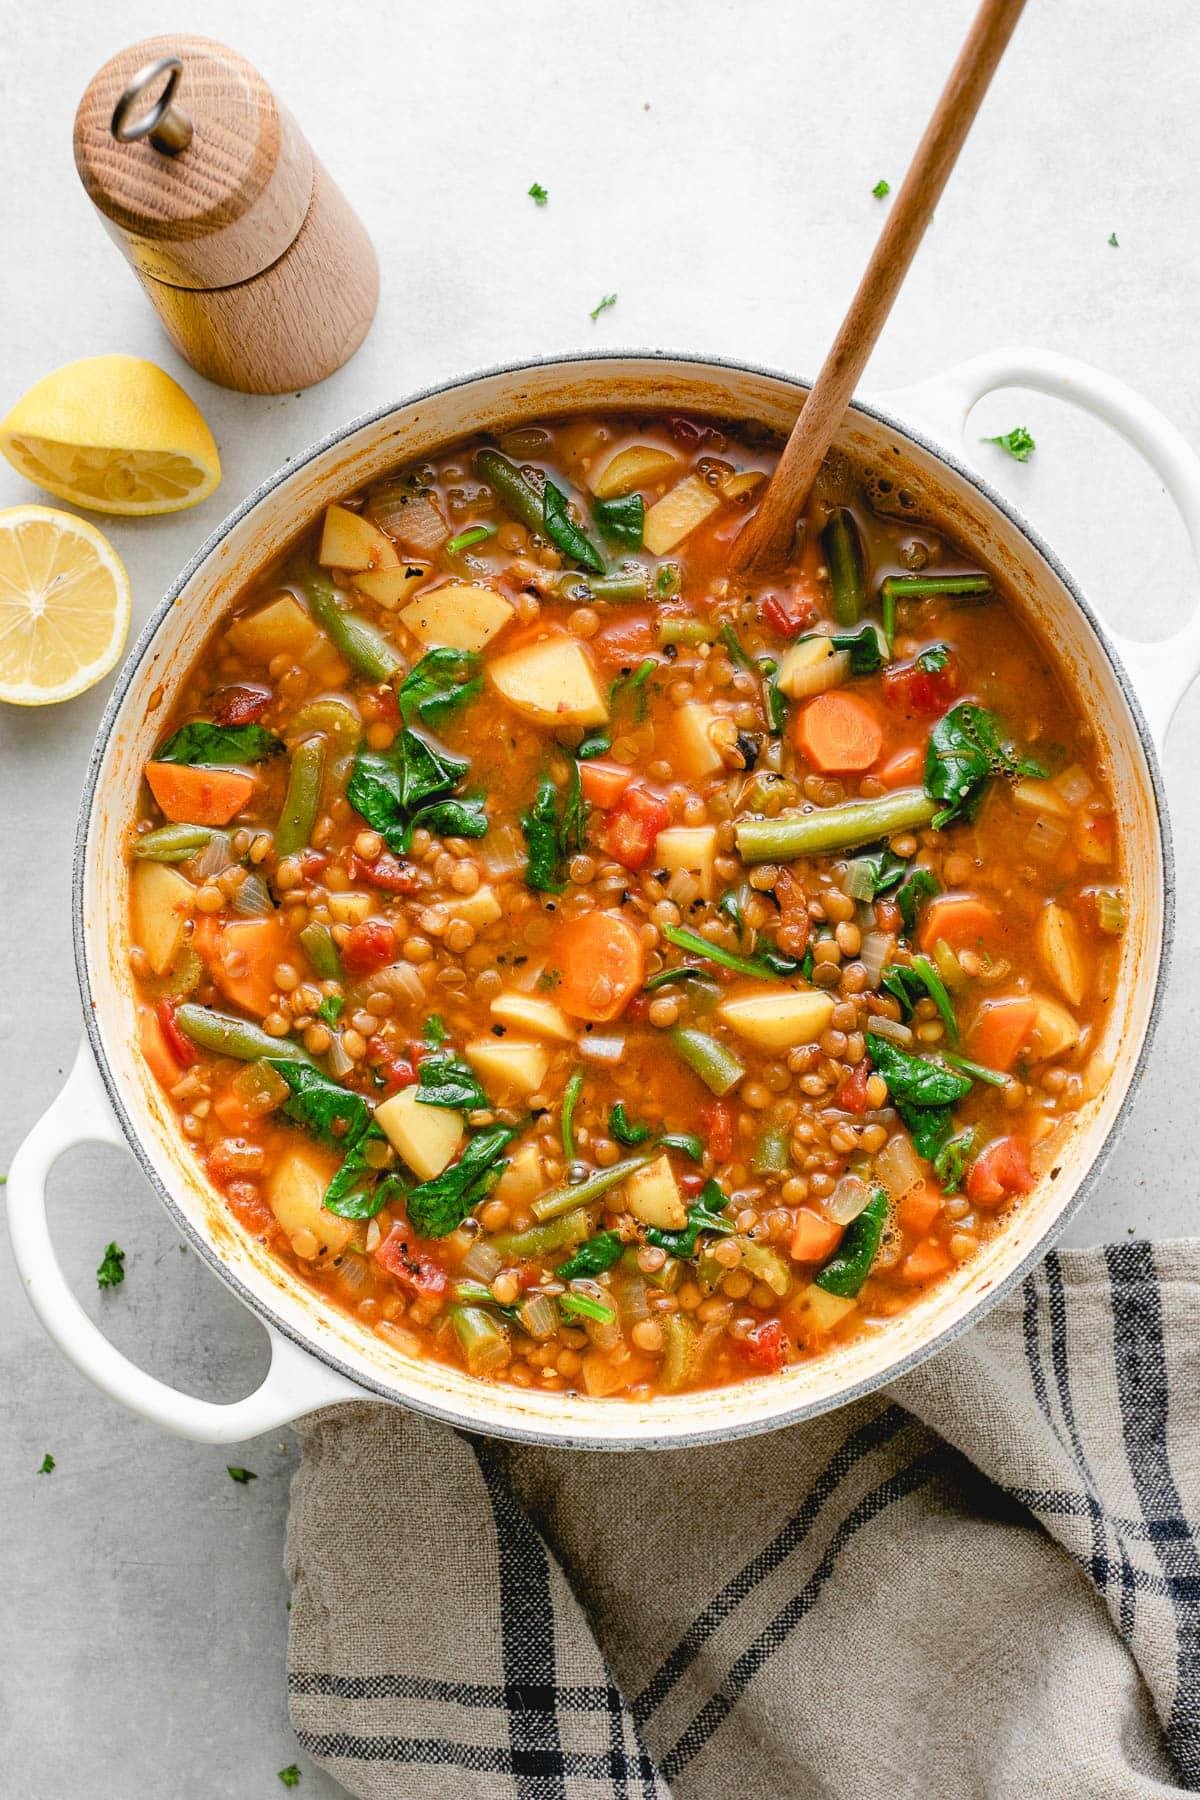 5-Ingredient Vegan Soup Recipe for a Cozy Night In - The Gourmet Cookbook